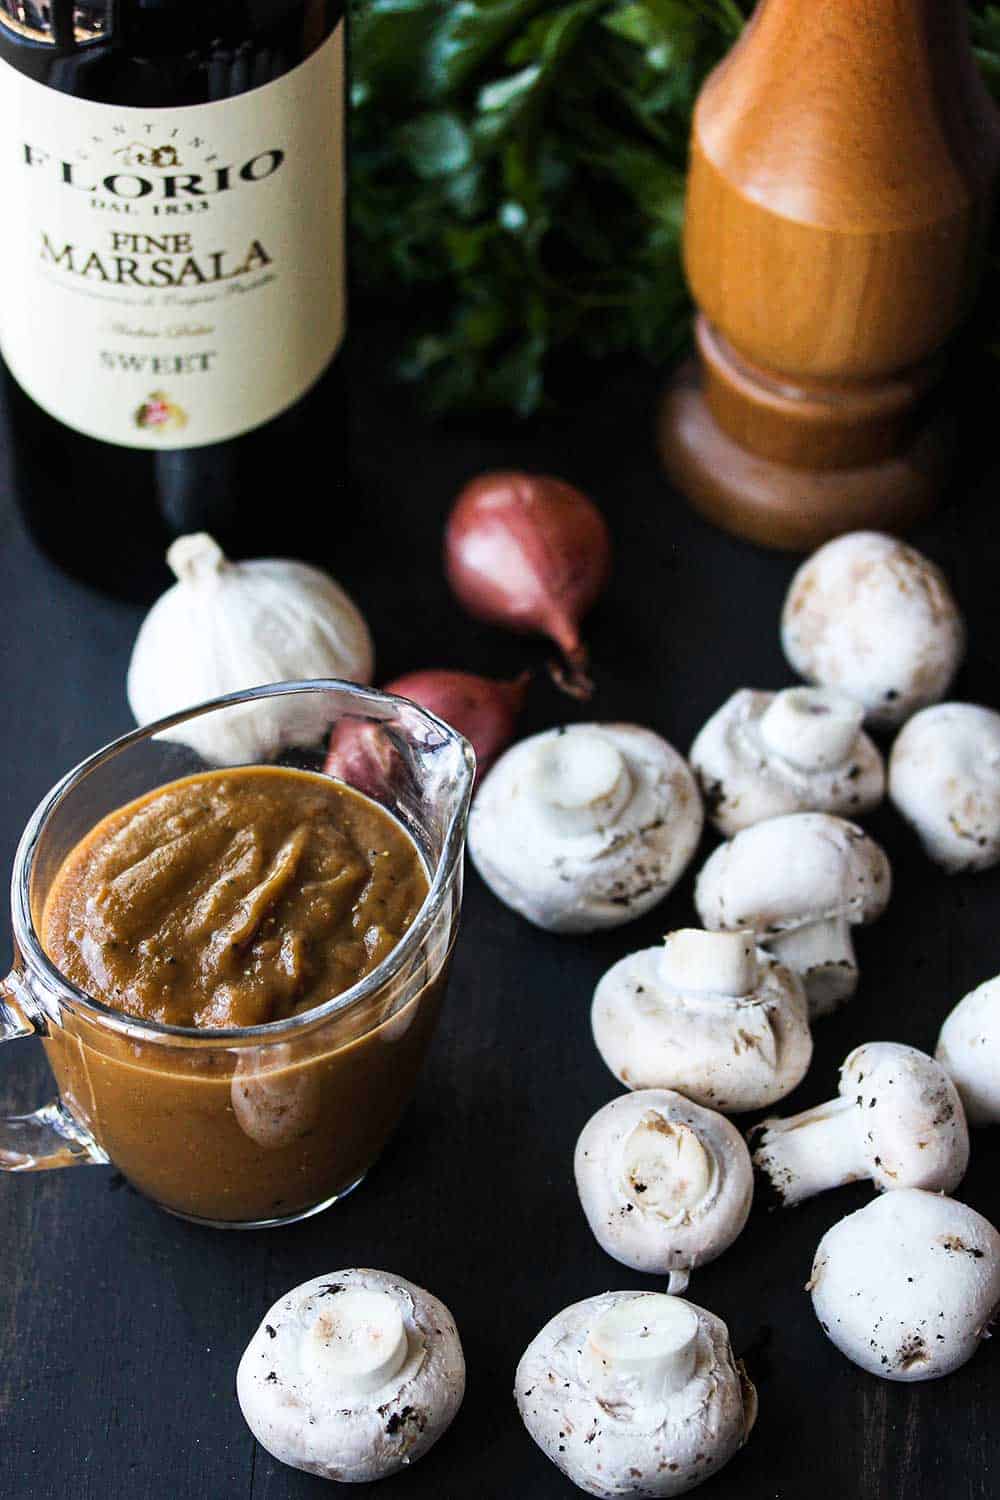 A wooden cutting board with whole button mushrooms, a small glass pitcher of brown sauce, whole garlic, shallots, a bottle of marsala wine, and a pepper grinder on it.